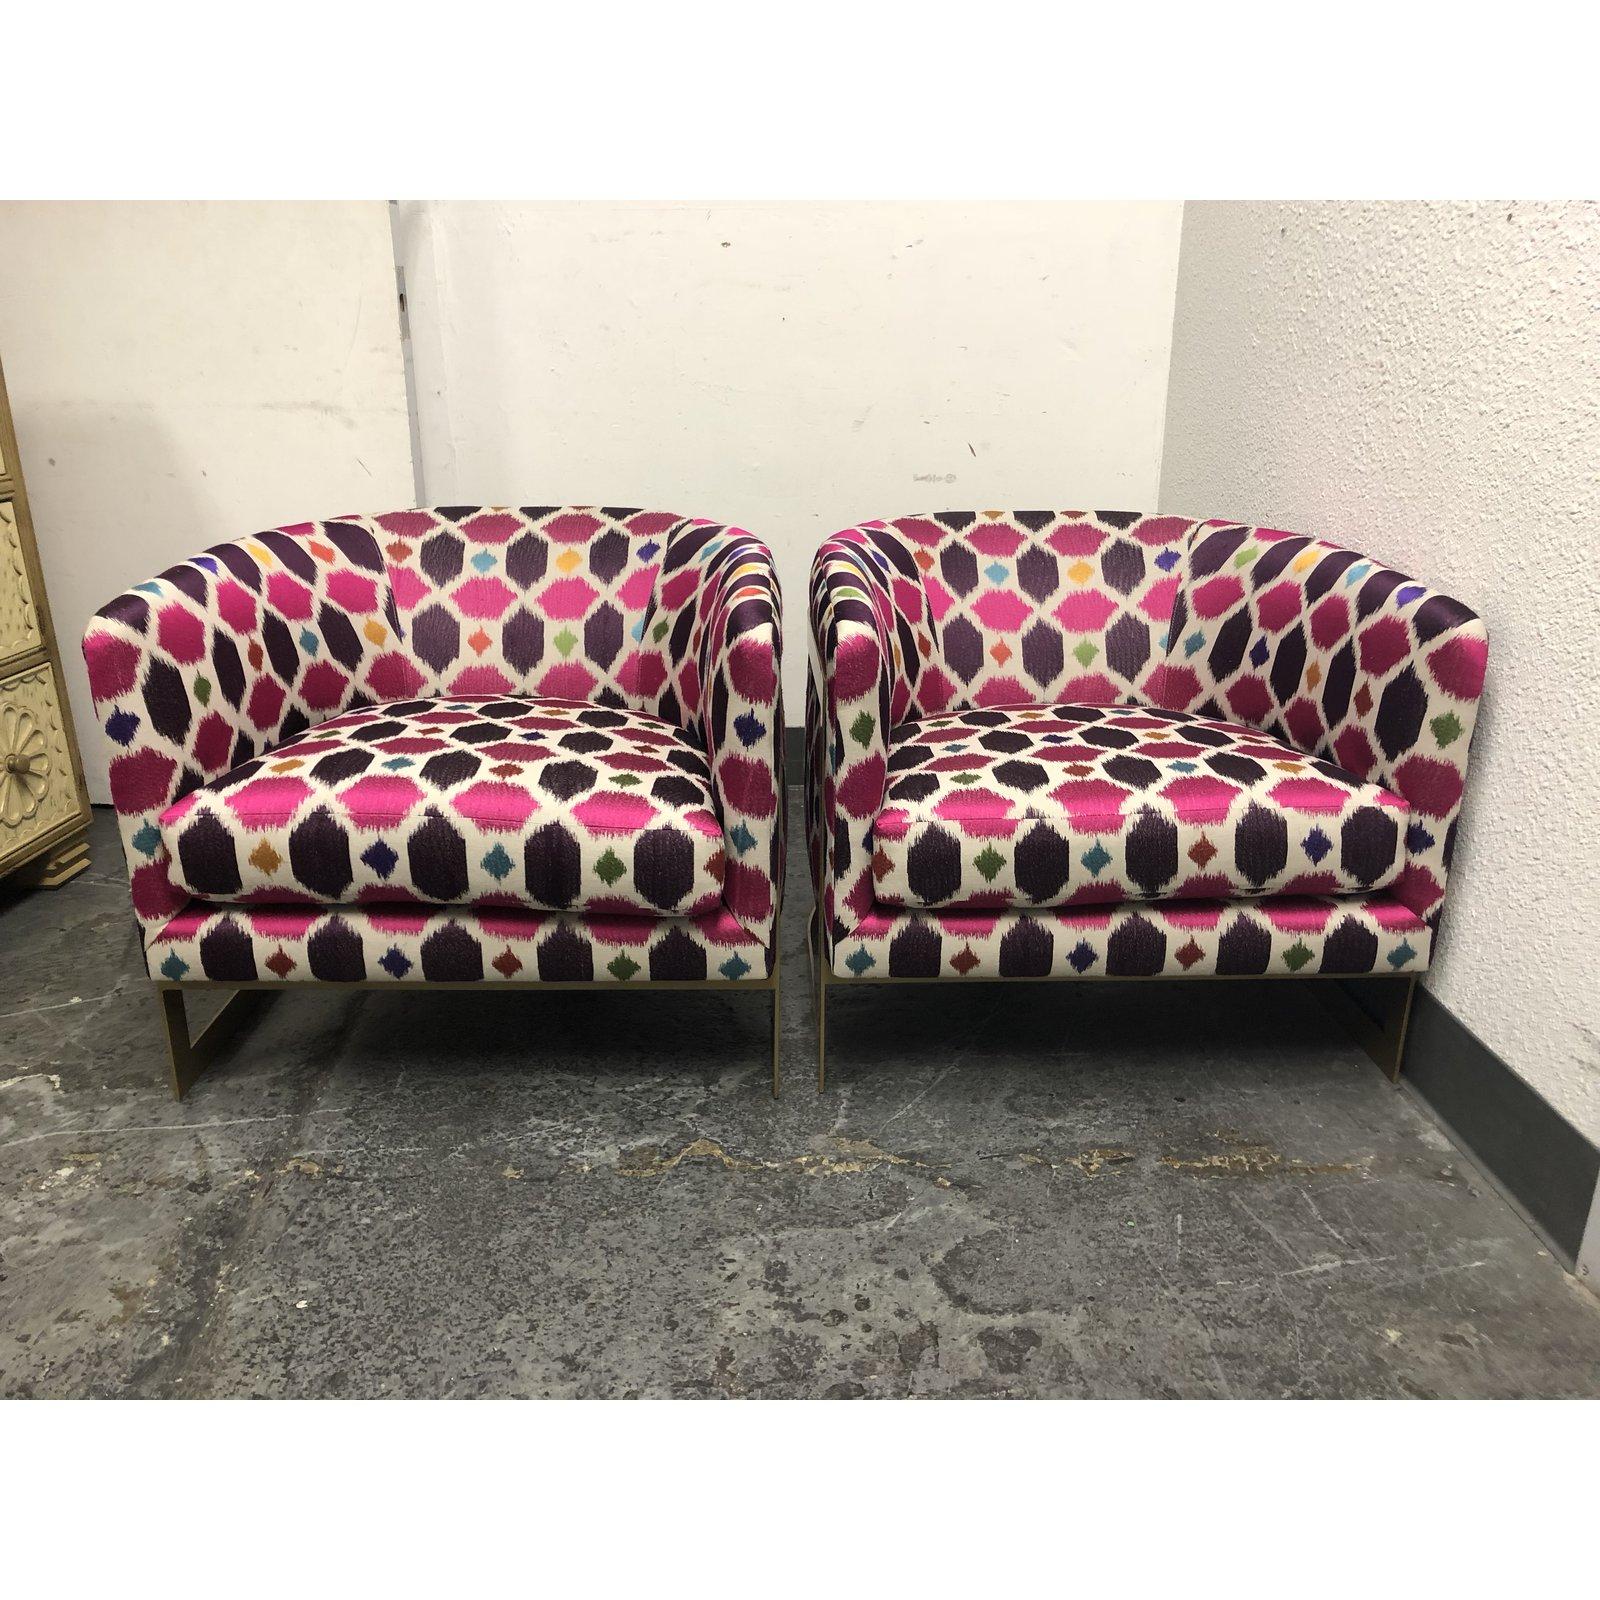 Pair of Nathan Anthony Korz Chair by Tina Nicole and Kravet Fabric (Stoff) im Angebot